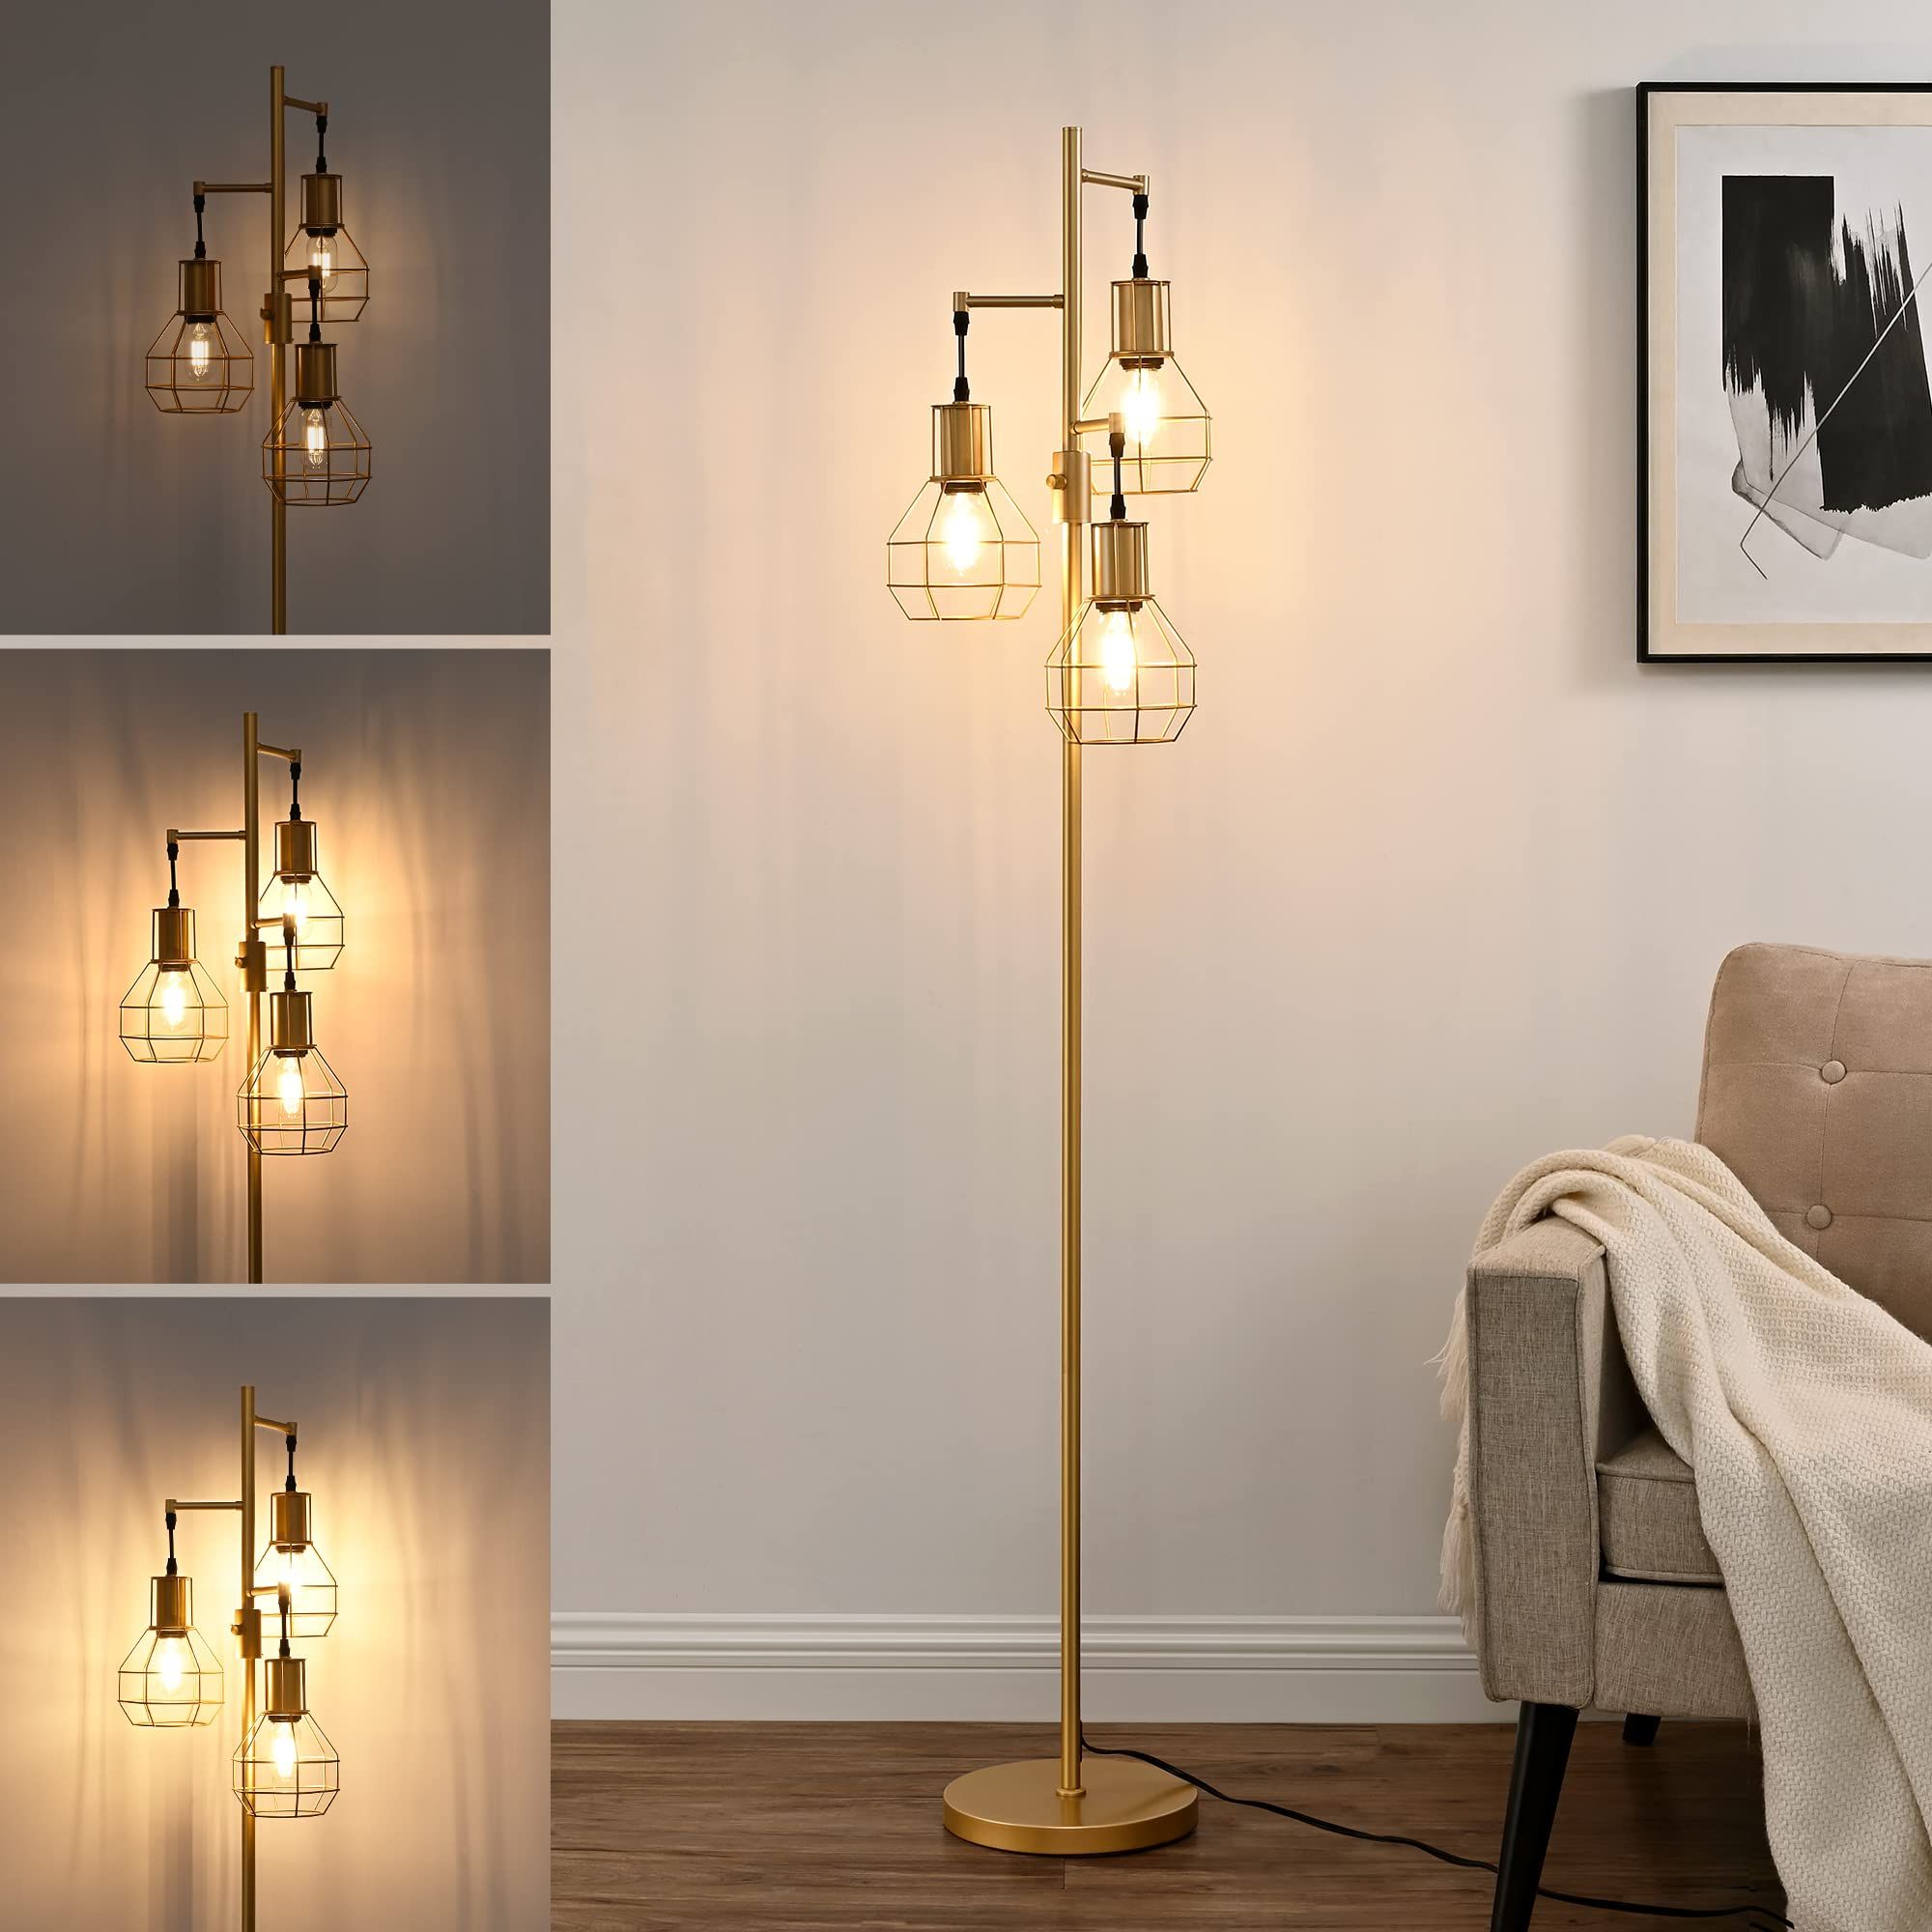 Well Known Lantern Standing Lamps Throughout Amazon: Edishine Gold Floor Lamp For Living Room, Farmhouse Dimmable Floor  Lamps With 3 Led Edison Bulbs, Modern Tall Standing Corner Lamp With  Elegant Metal Heads For Bedroom, Office, Industrial Home Decor : (View 6 of 10)